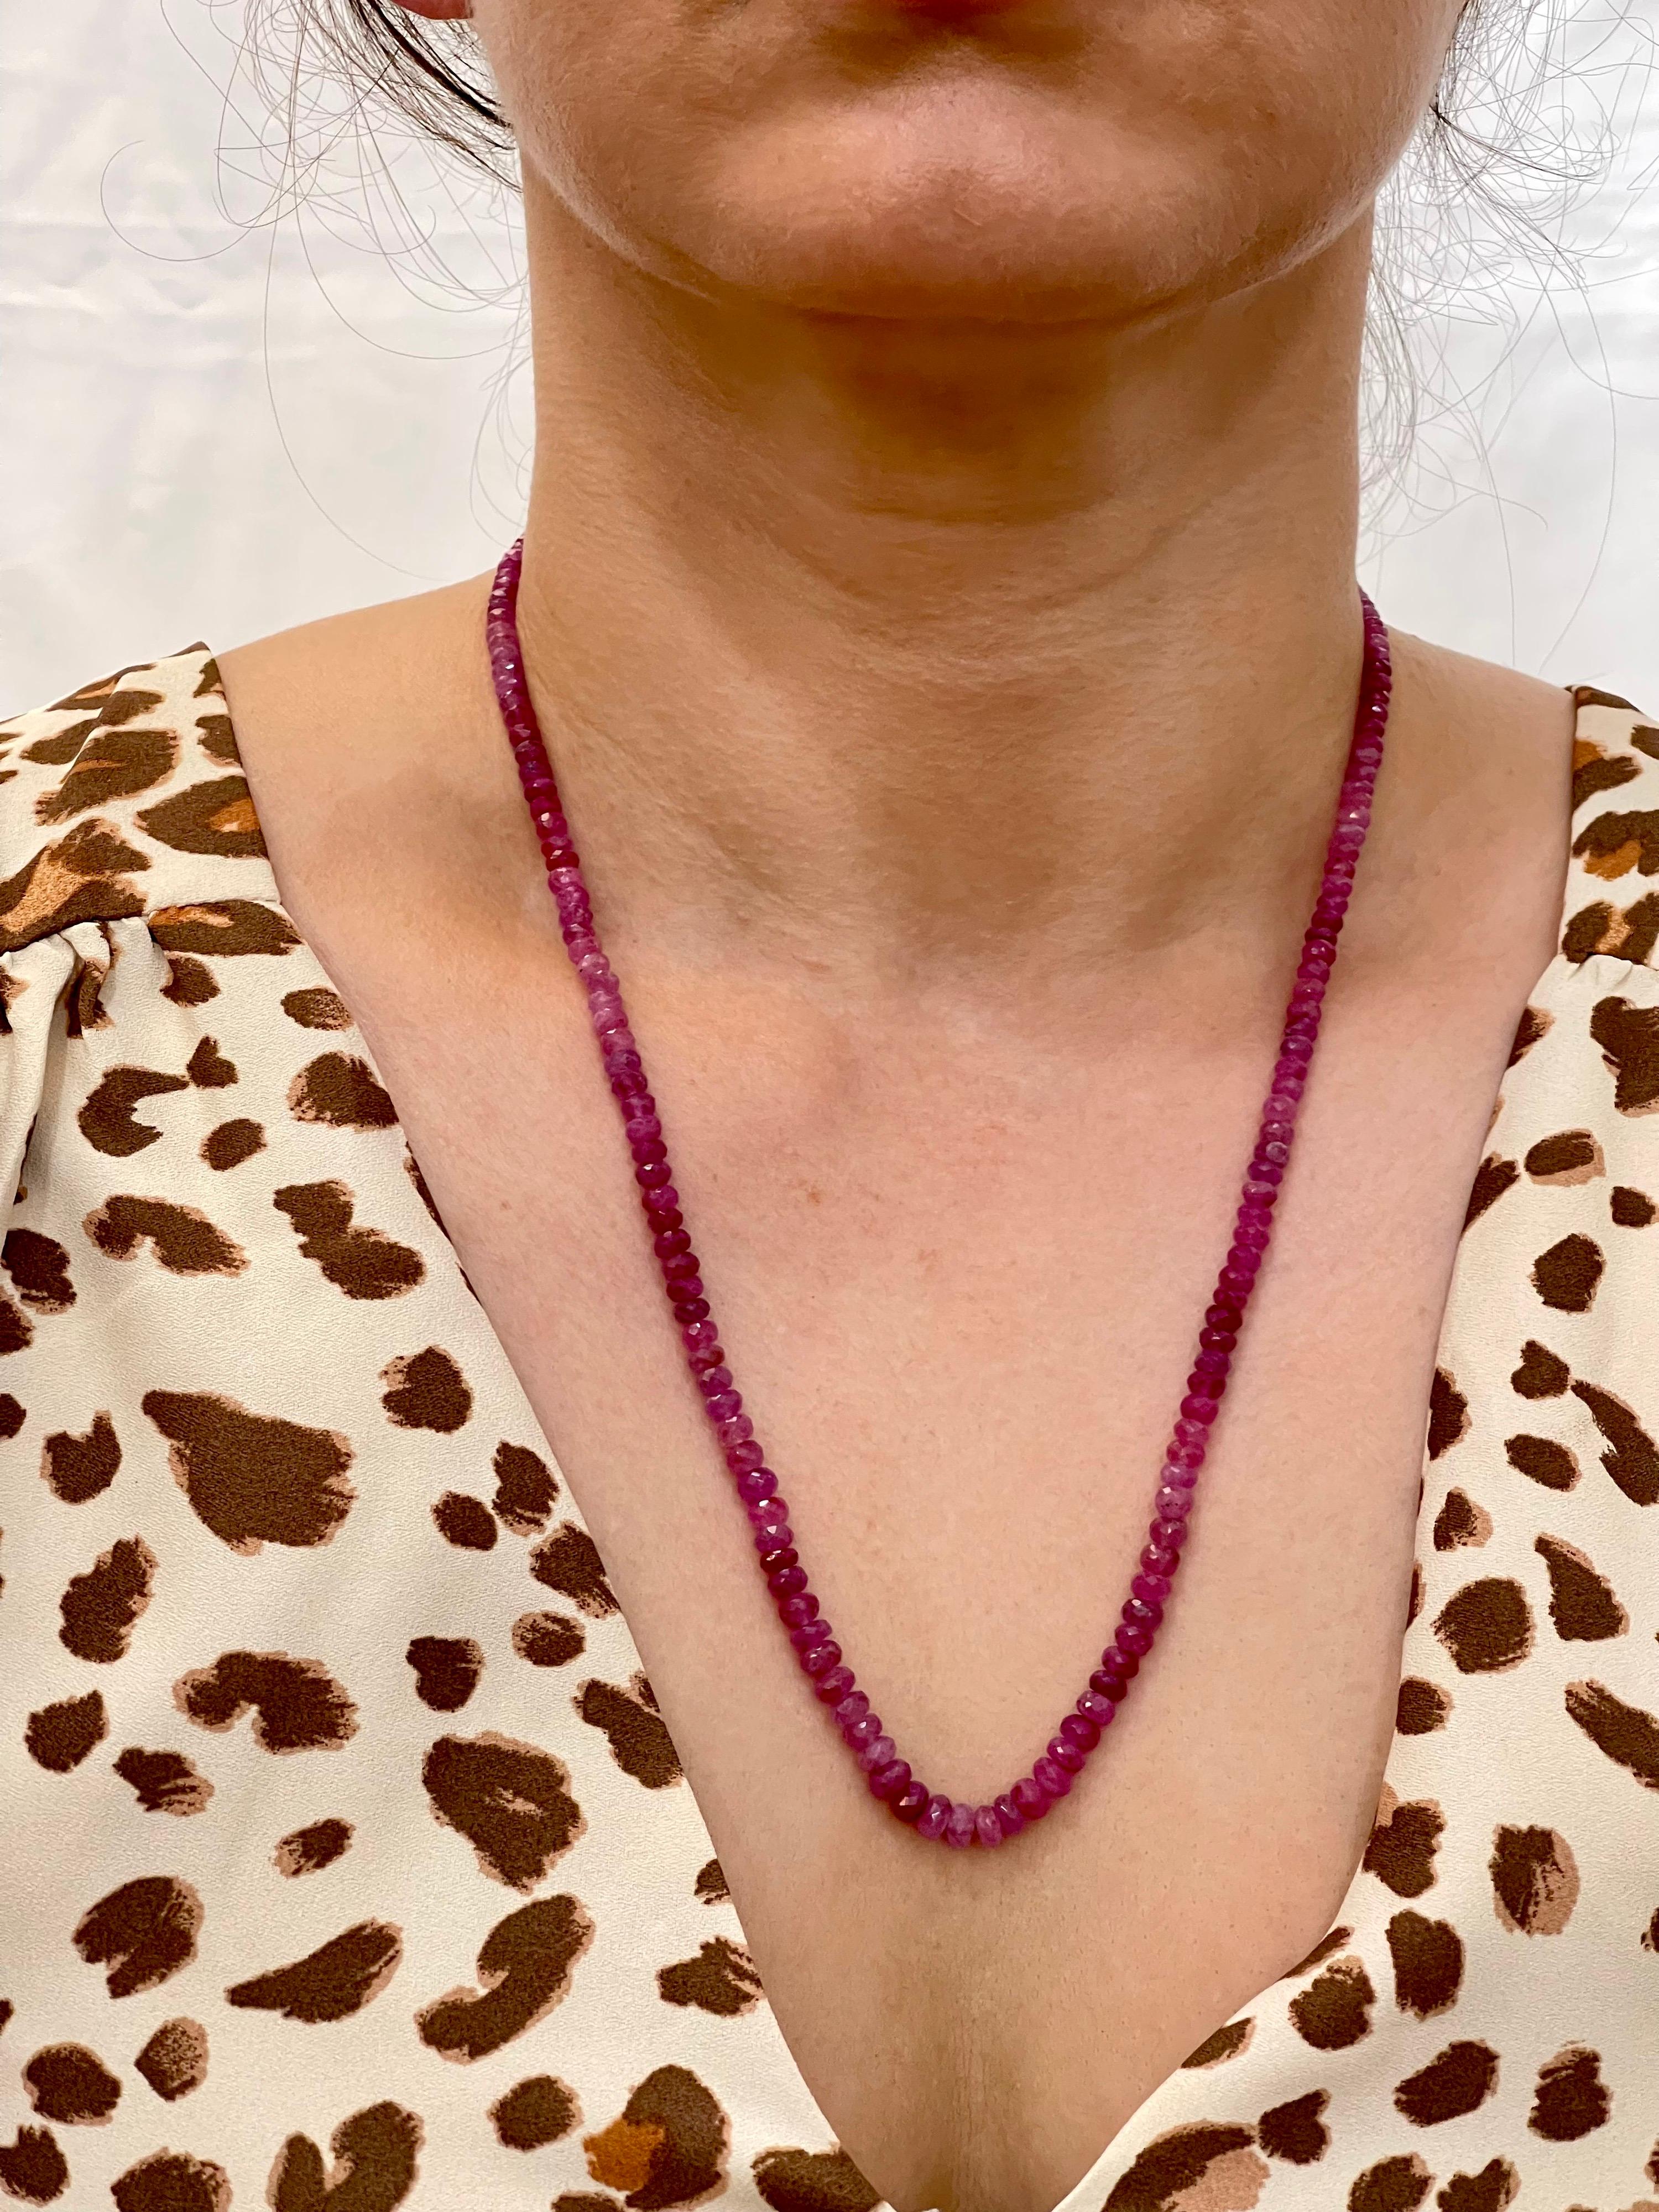 Women's Natural 140 Carat Natural Ruby Bead Single Strand Necklace with Silver Clasp For Sale